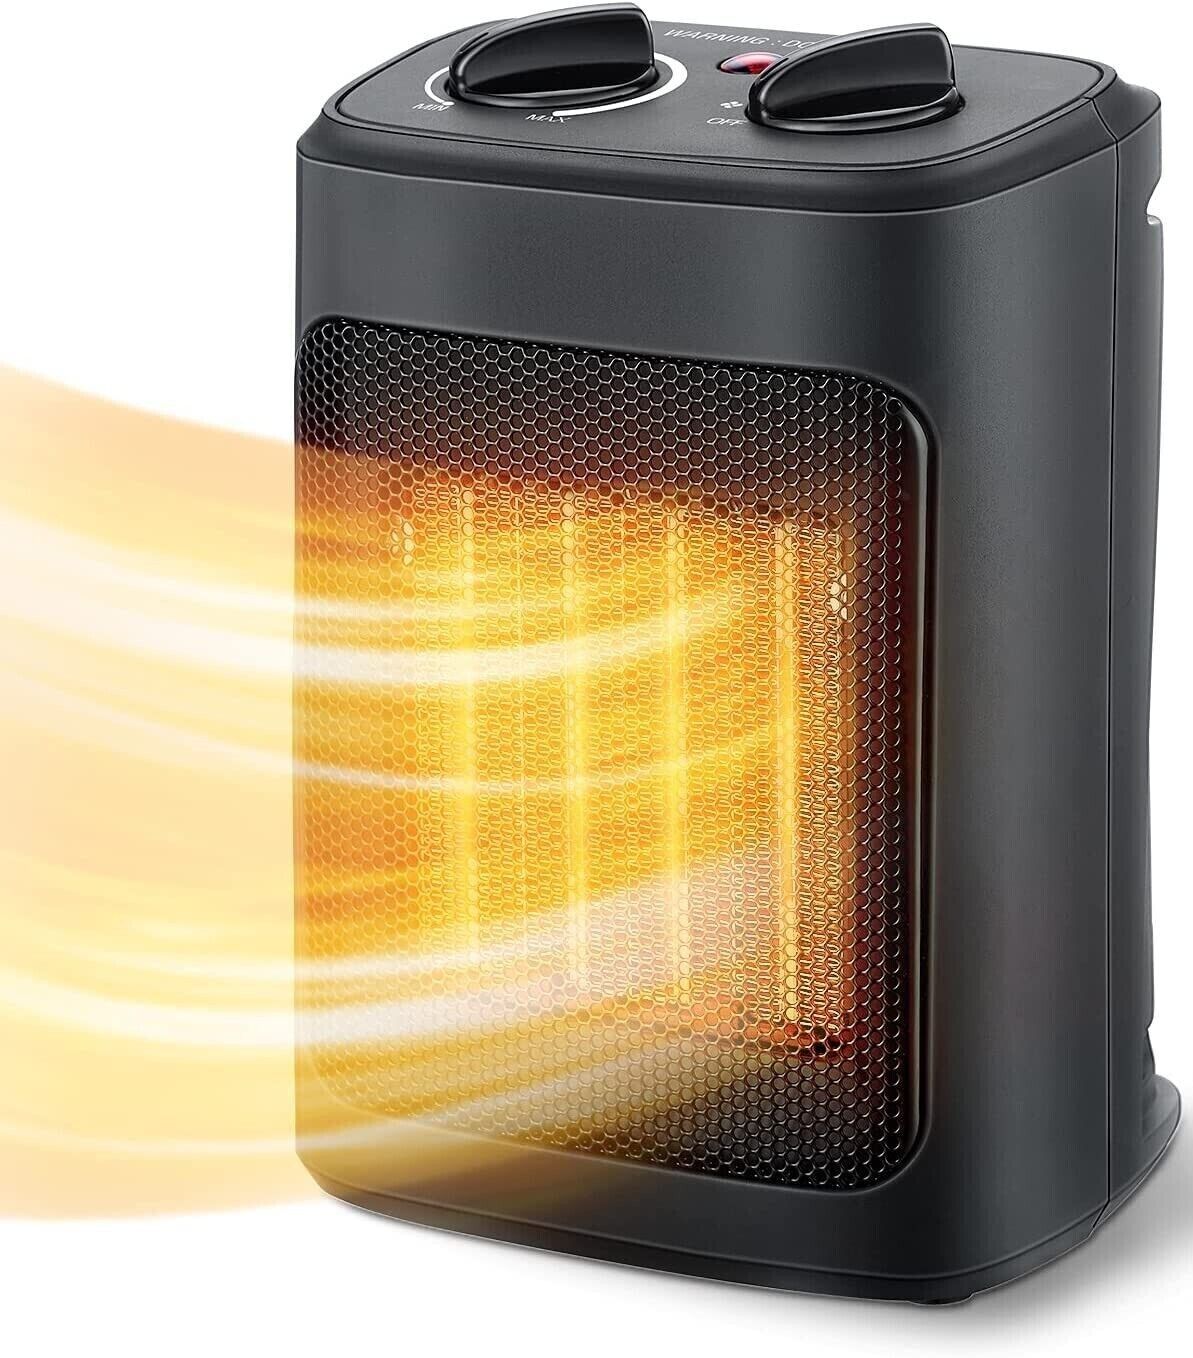 Space Heater Pelonis with Thermostat 4 Function Electric Ceramic 1500 Watt 9 Inch Black